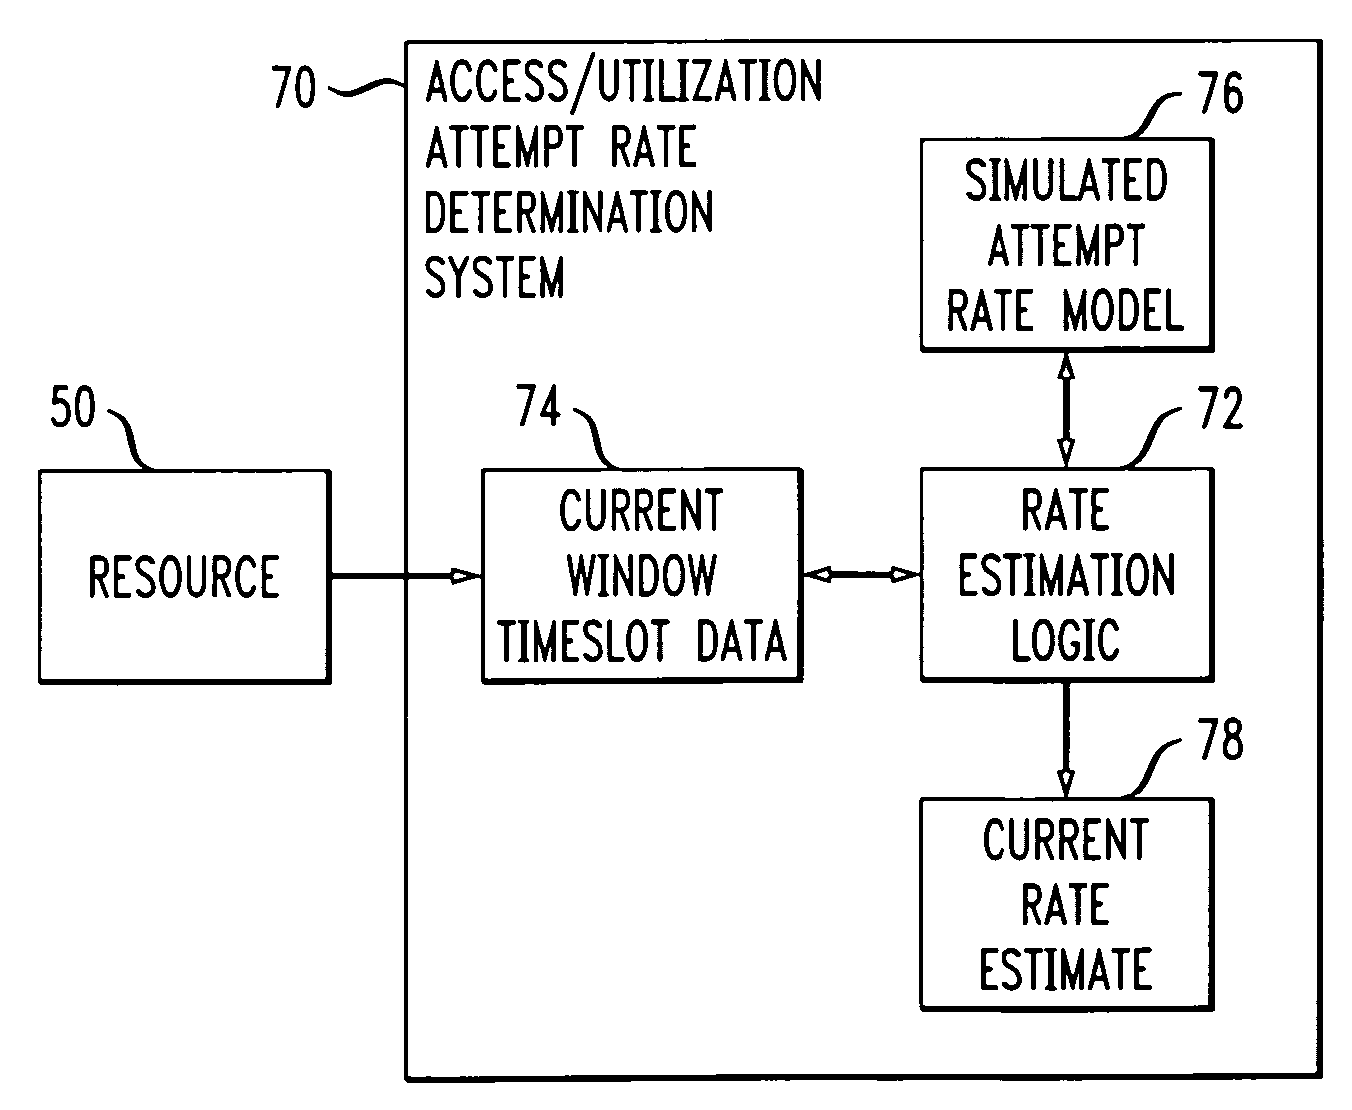 Methods and systems for estimating access/utilization attempt rates for resources of contention across single or multiple classes of devices